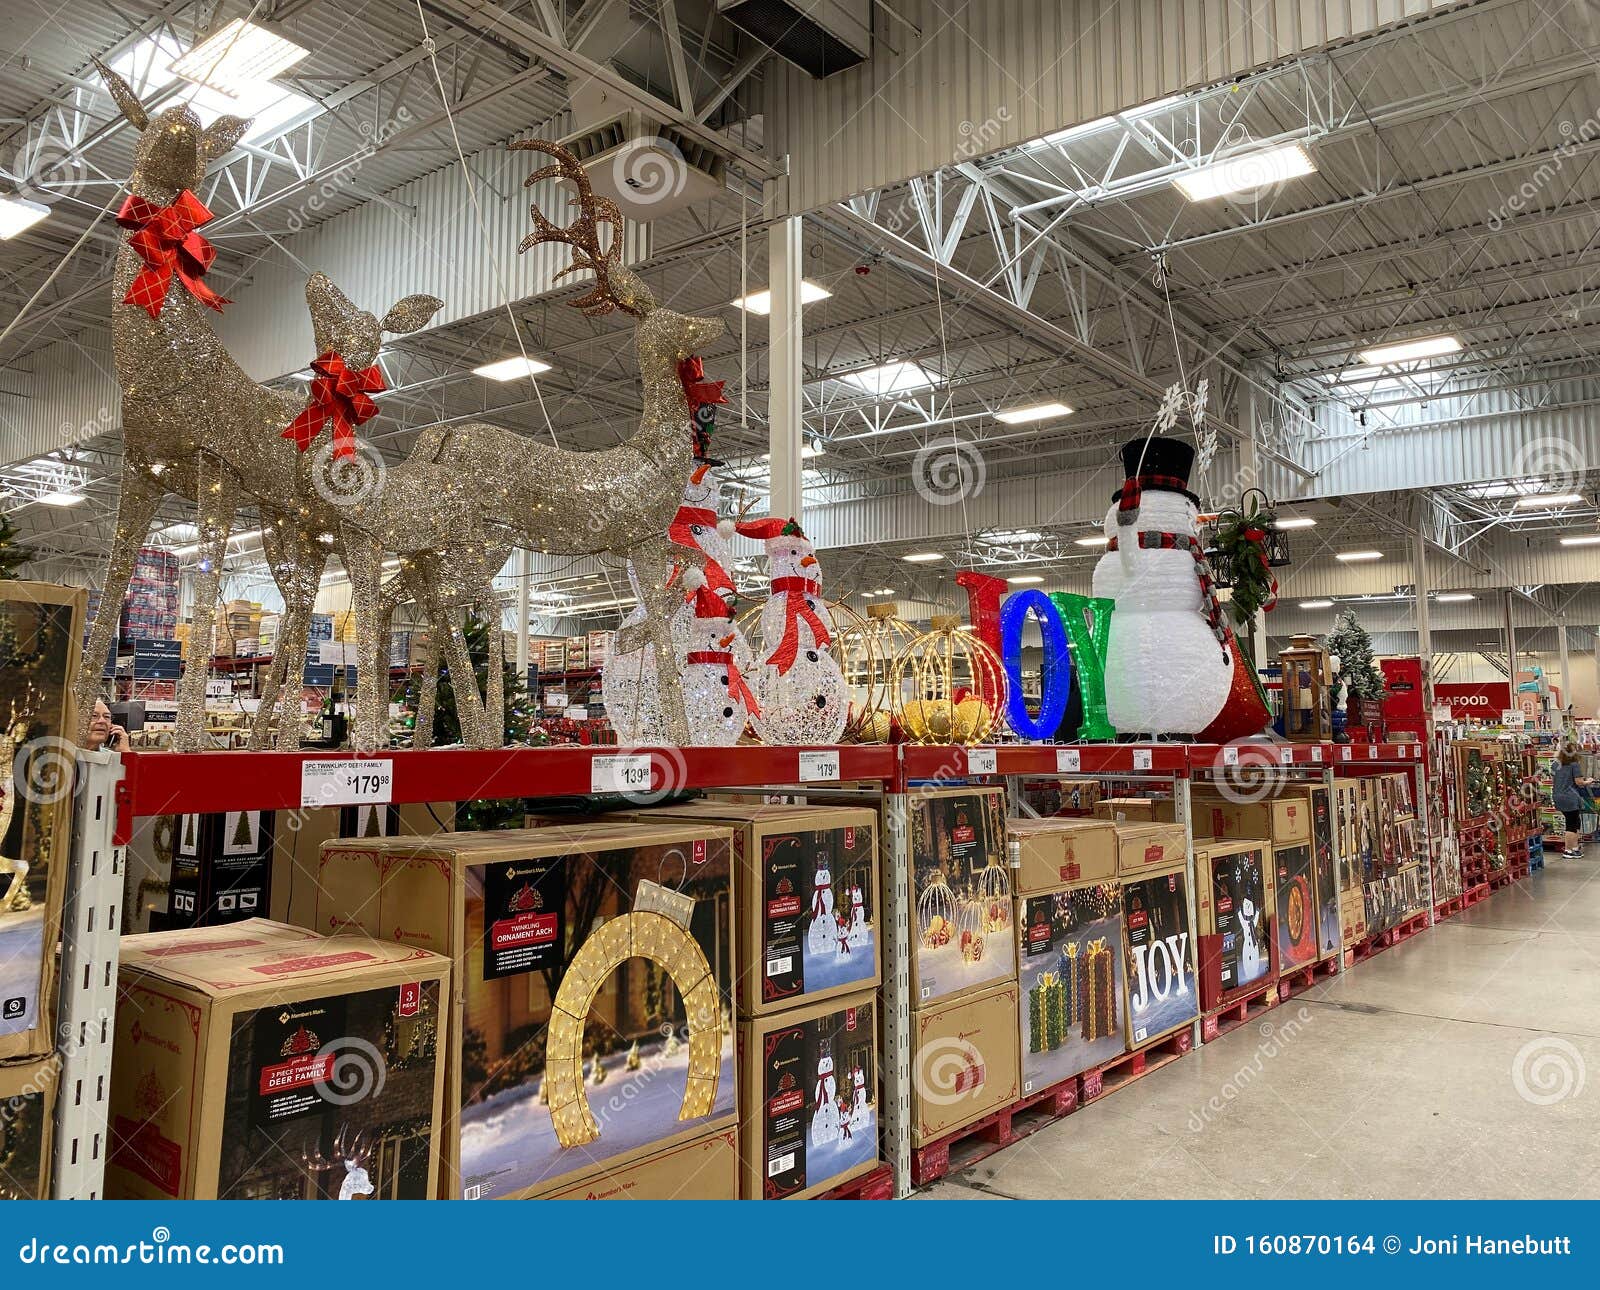 The Christmas Decoration Aisle of a Sams Club Editorial Stock Image - Image  of indoor, retail: 160870164